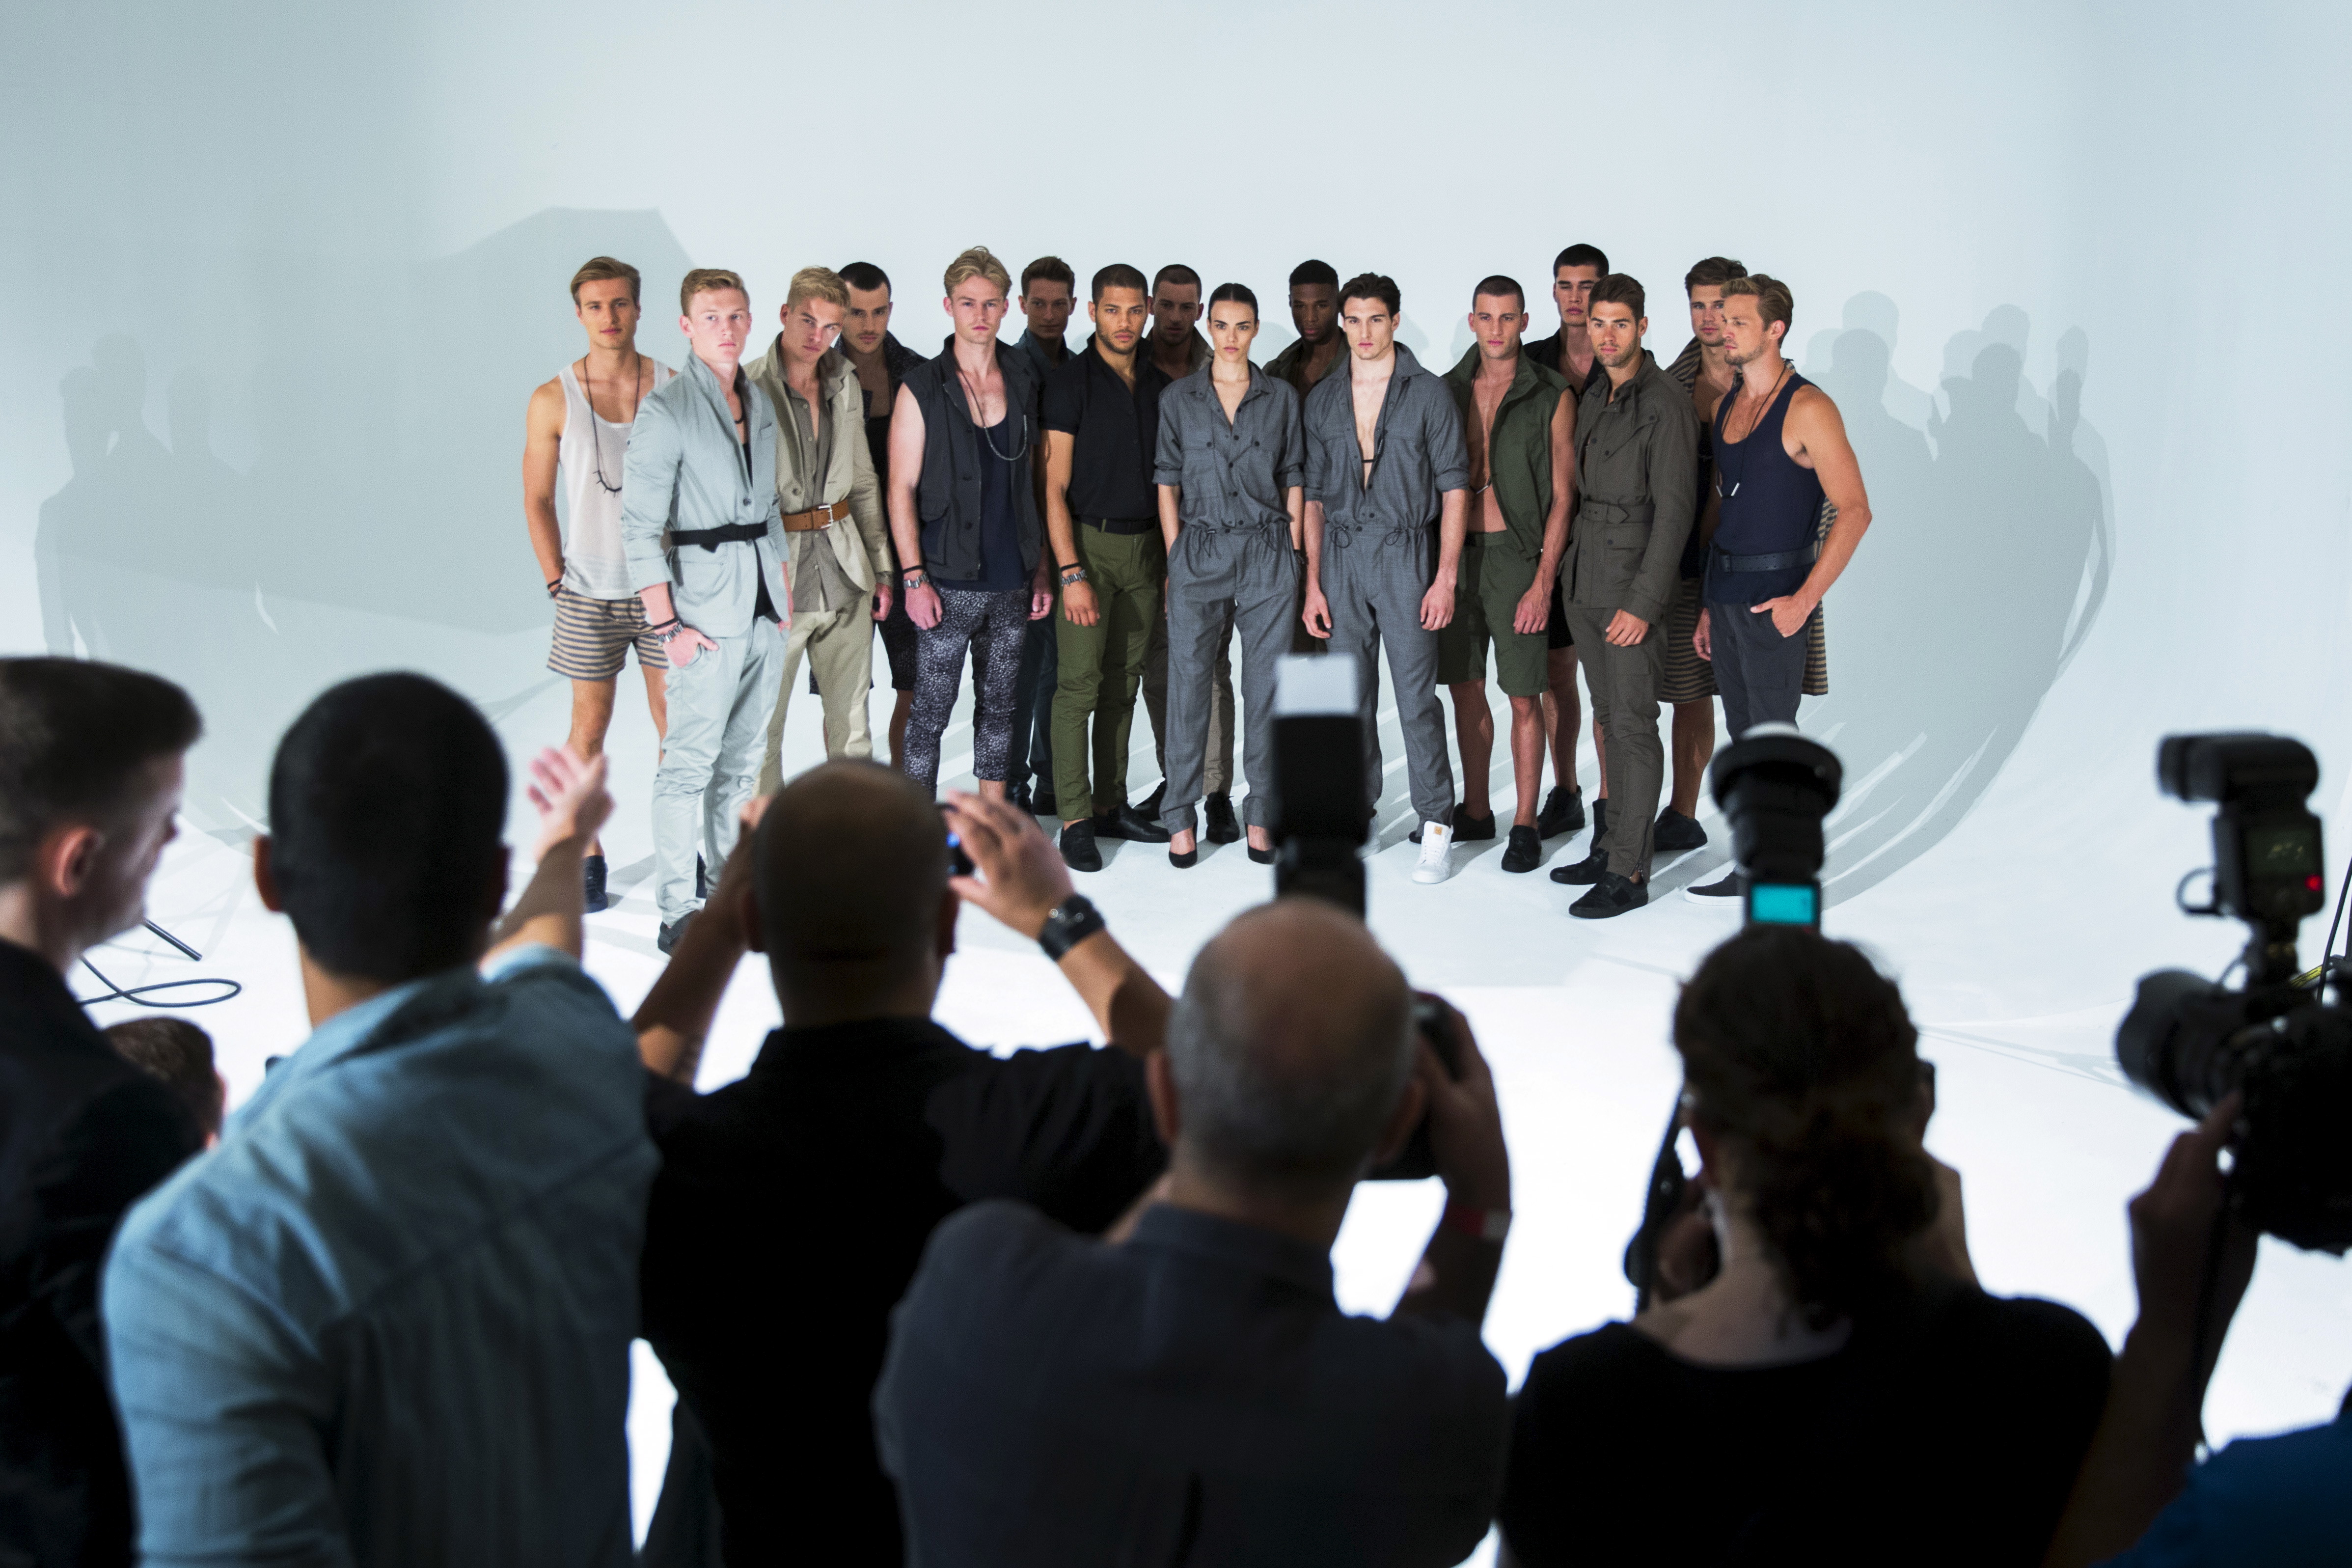 Models stand on stage for the Cadet presentation during Men's Fashion Week, in New York